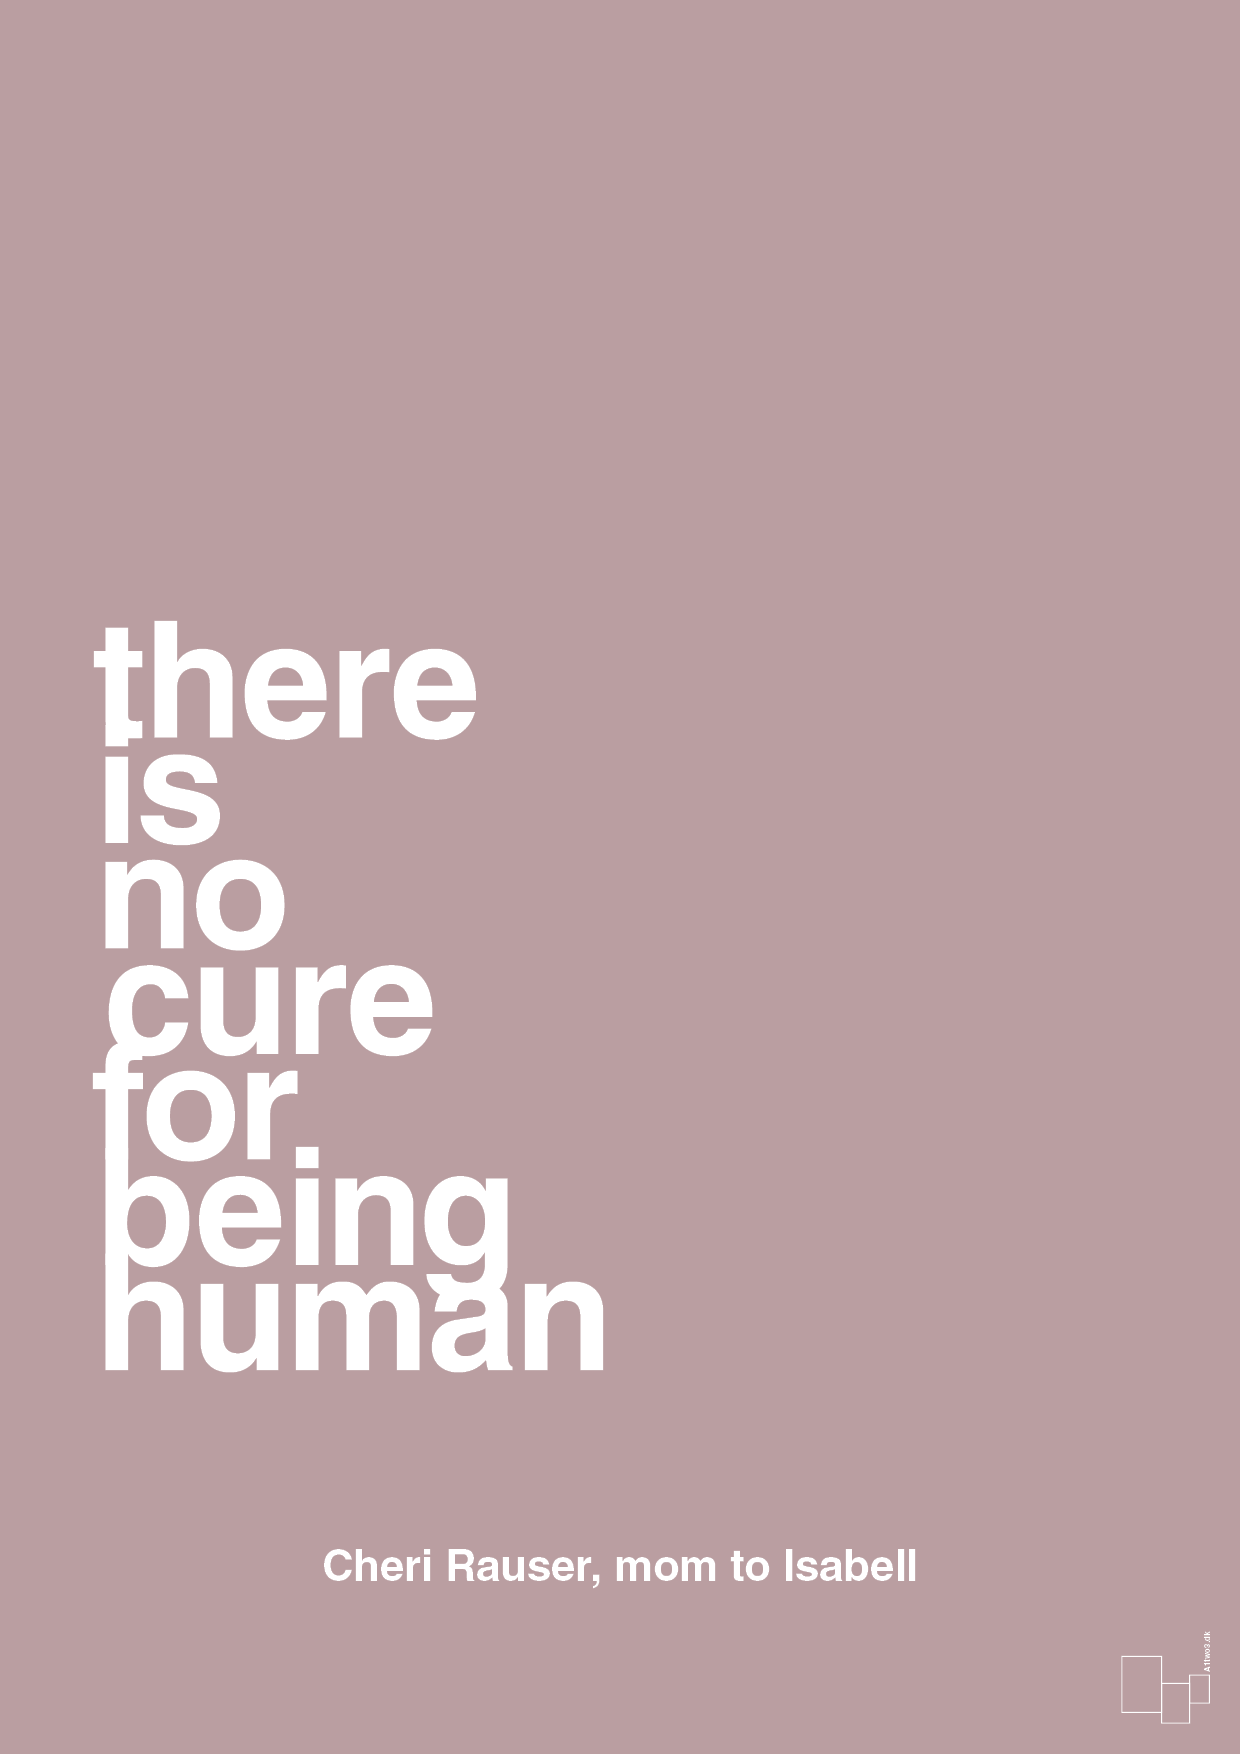 there is no cure for being human - Plakat med Samfund i Light Rose